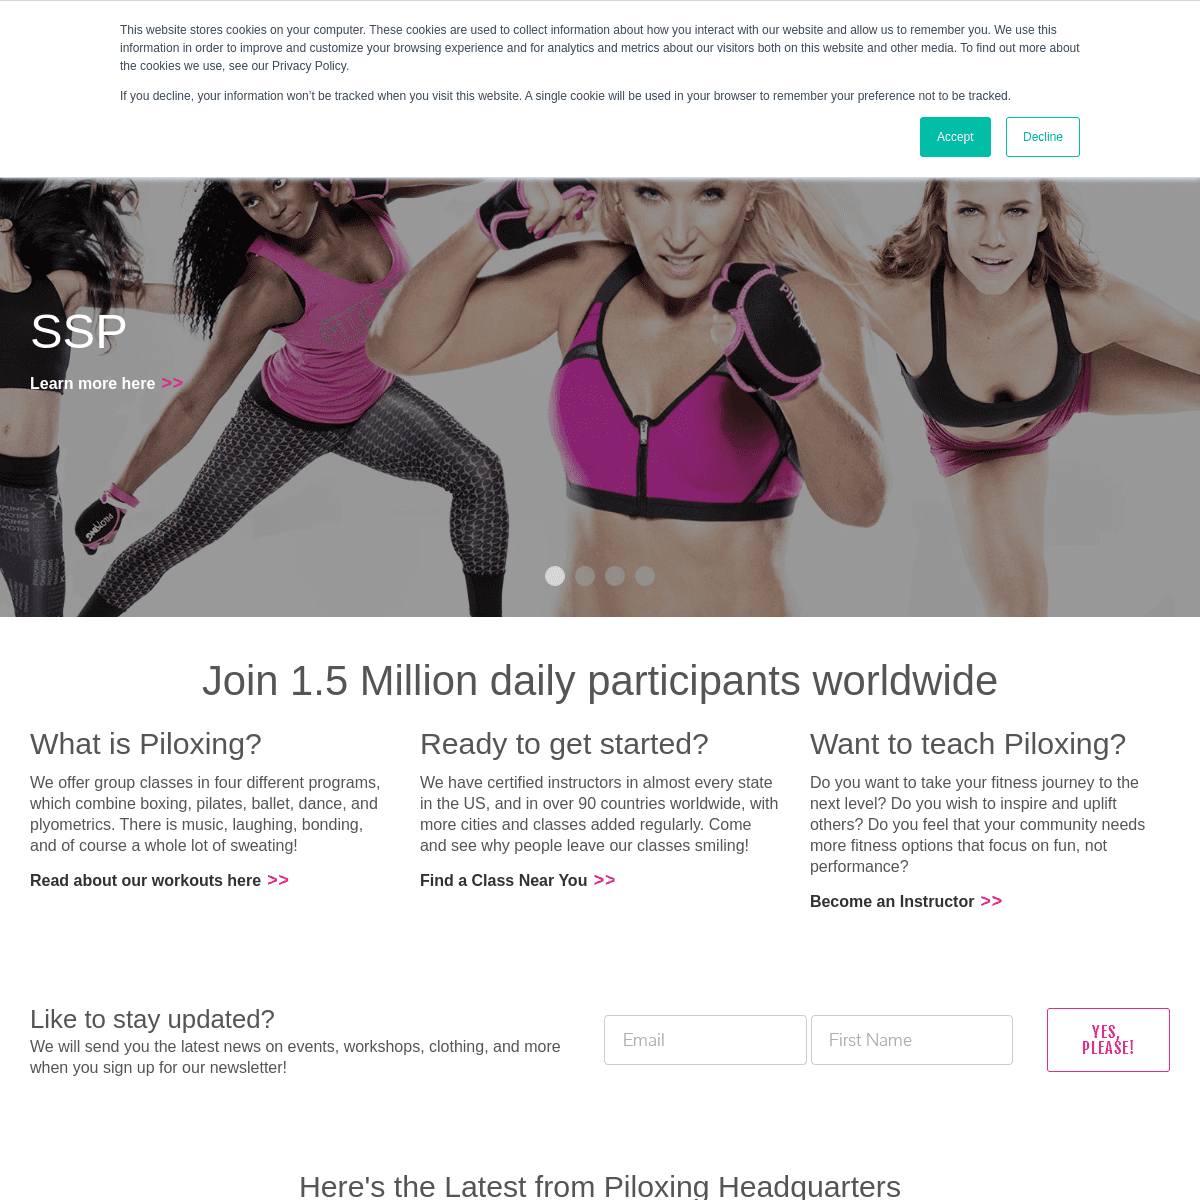 A complete backup of https://piloxing.com